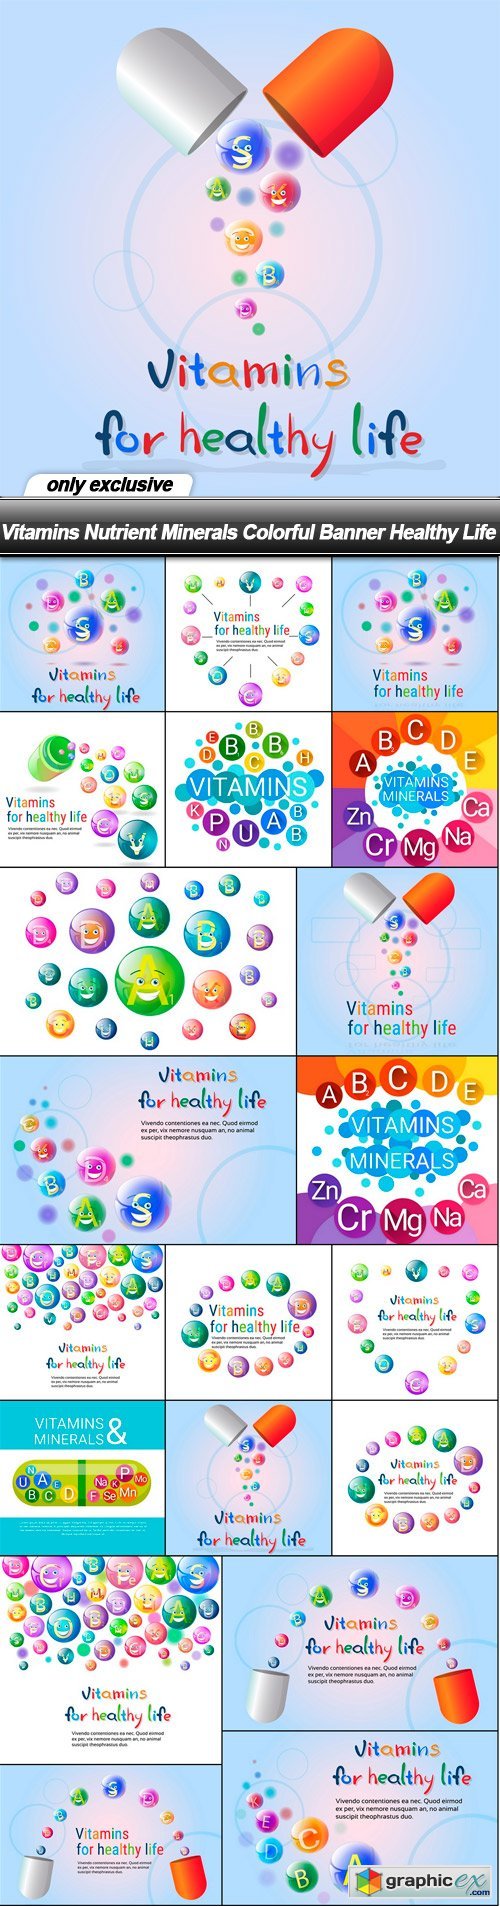 Vitamins Nutrient Minerals Colorful Banner Healthy Life - 20 EPS